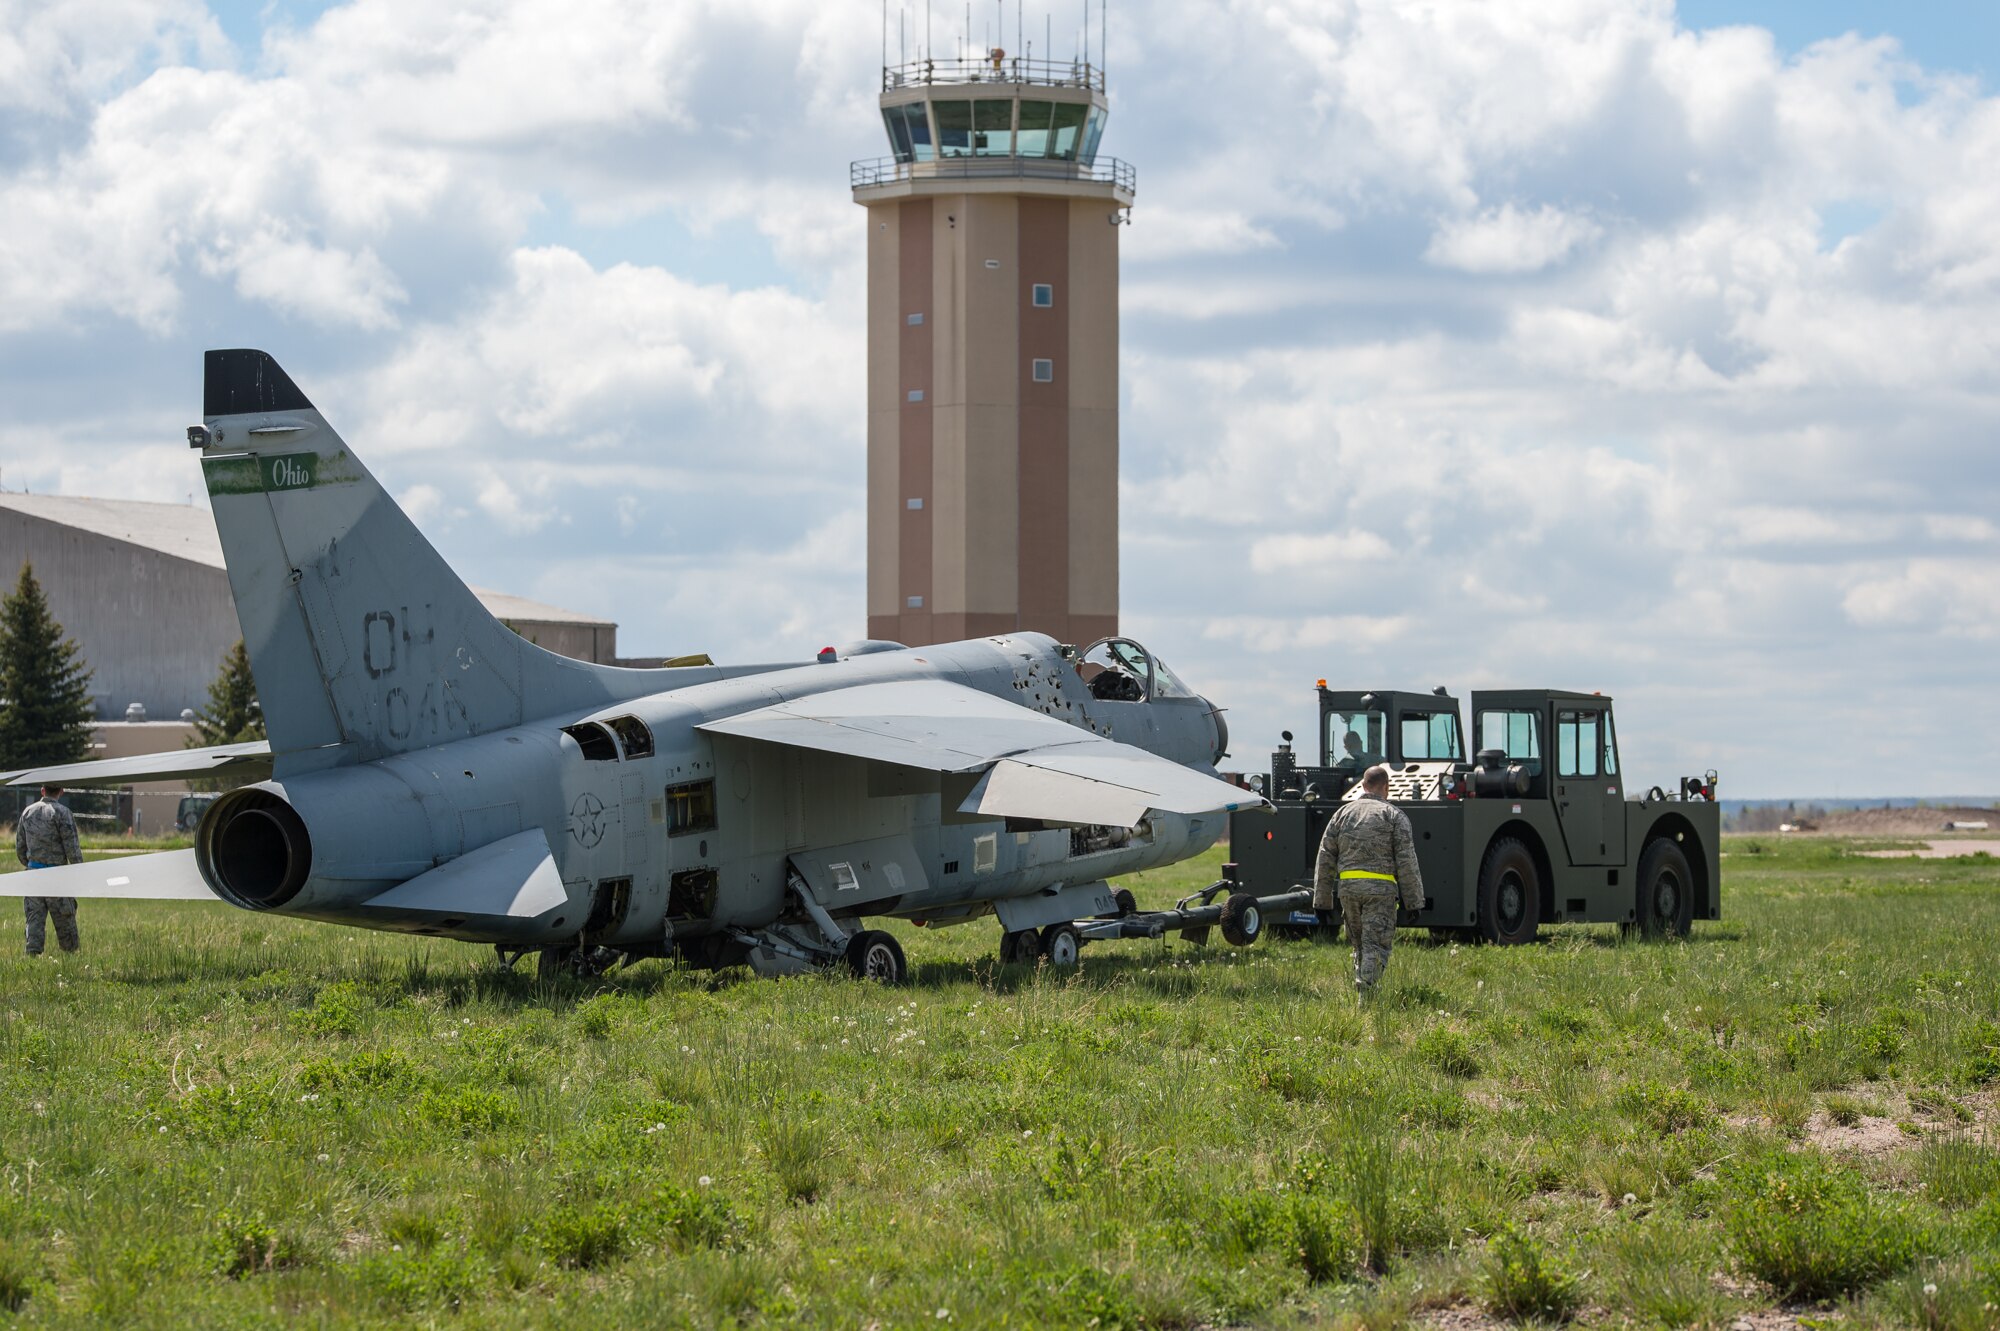 U.S. Air Force Airmen with the 153rd Maintenance Group's Crash Damage or Disabled Aircraft Recovery tow an A-7 Corsair II aircraft, May 11, 2017 in Cheyenne, Wyoming. Maintainers from all aircraft specialties practiced moving a fighter aircraft from the mud into a parking spot as part of an annual CDDAR requirement. (U.S. Air National Guard photo by Senior Master Sgt. Charles Delano/released)